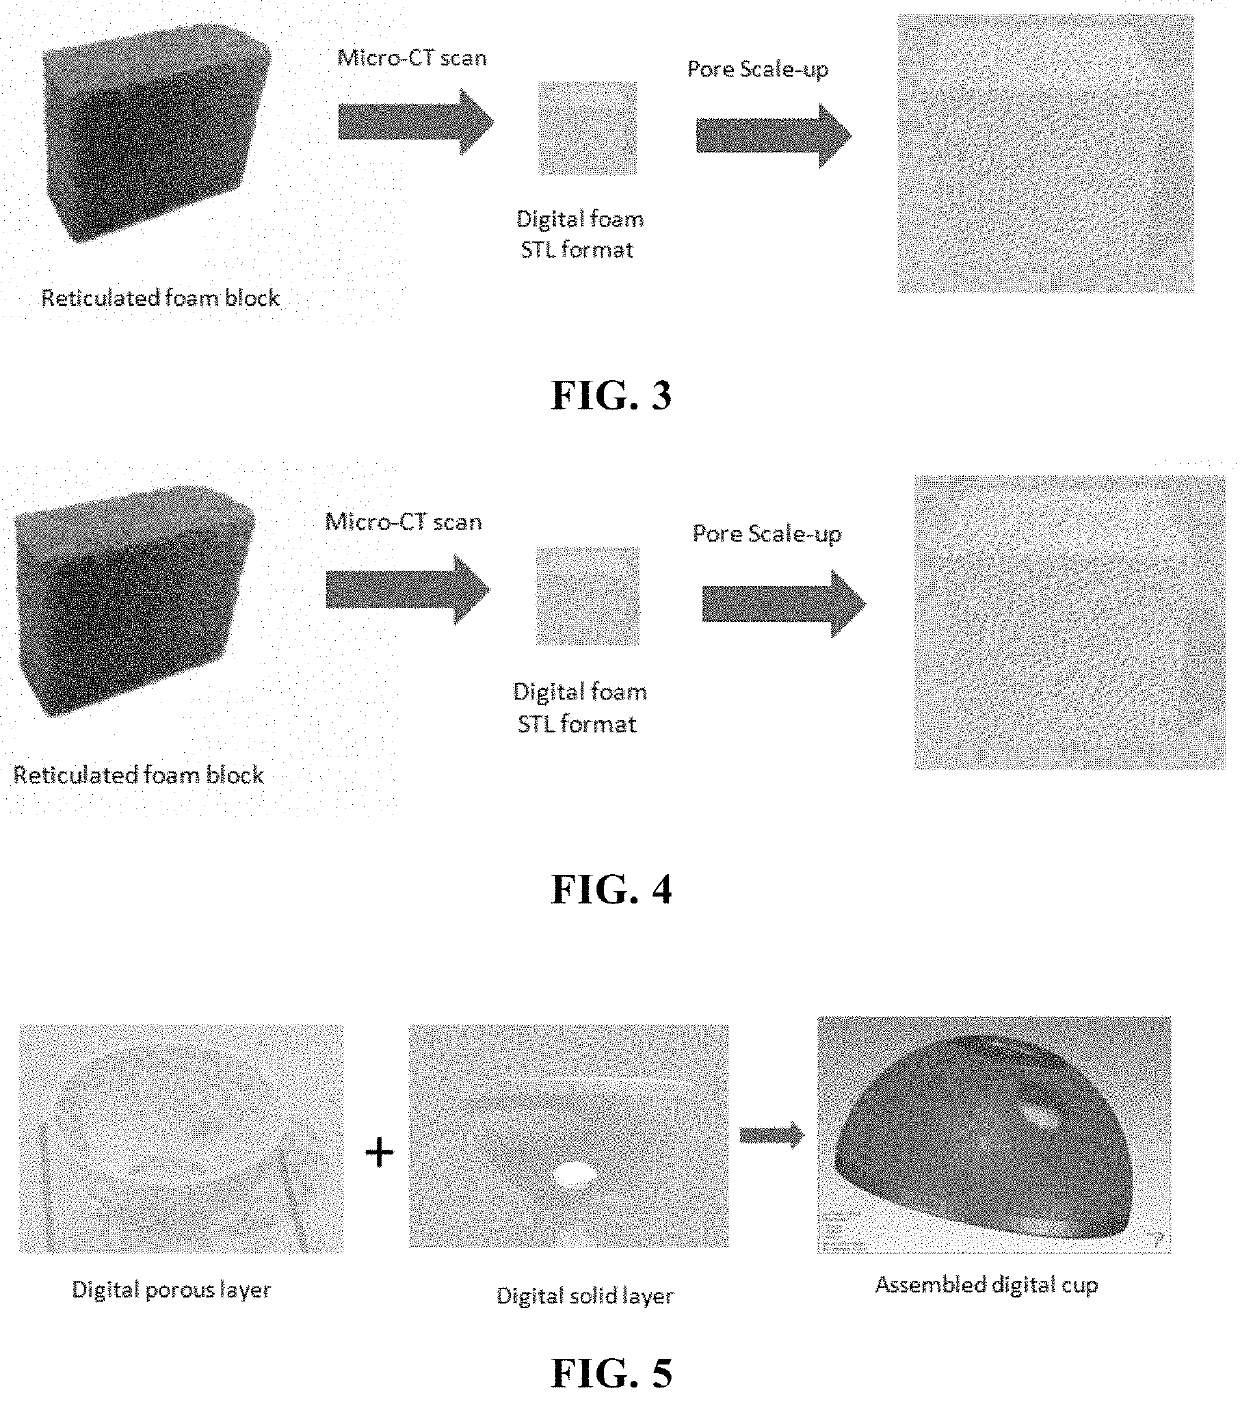 Implant and a method of making the implant and a method of calculating porosity of a porous material